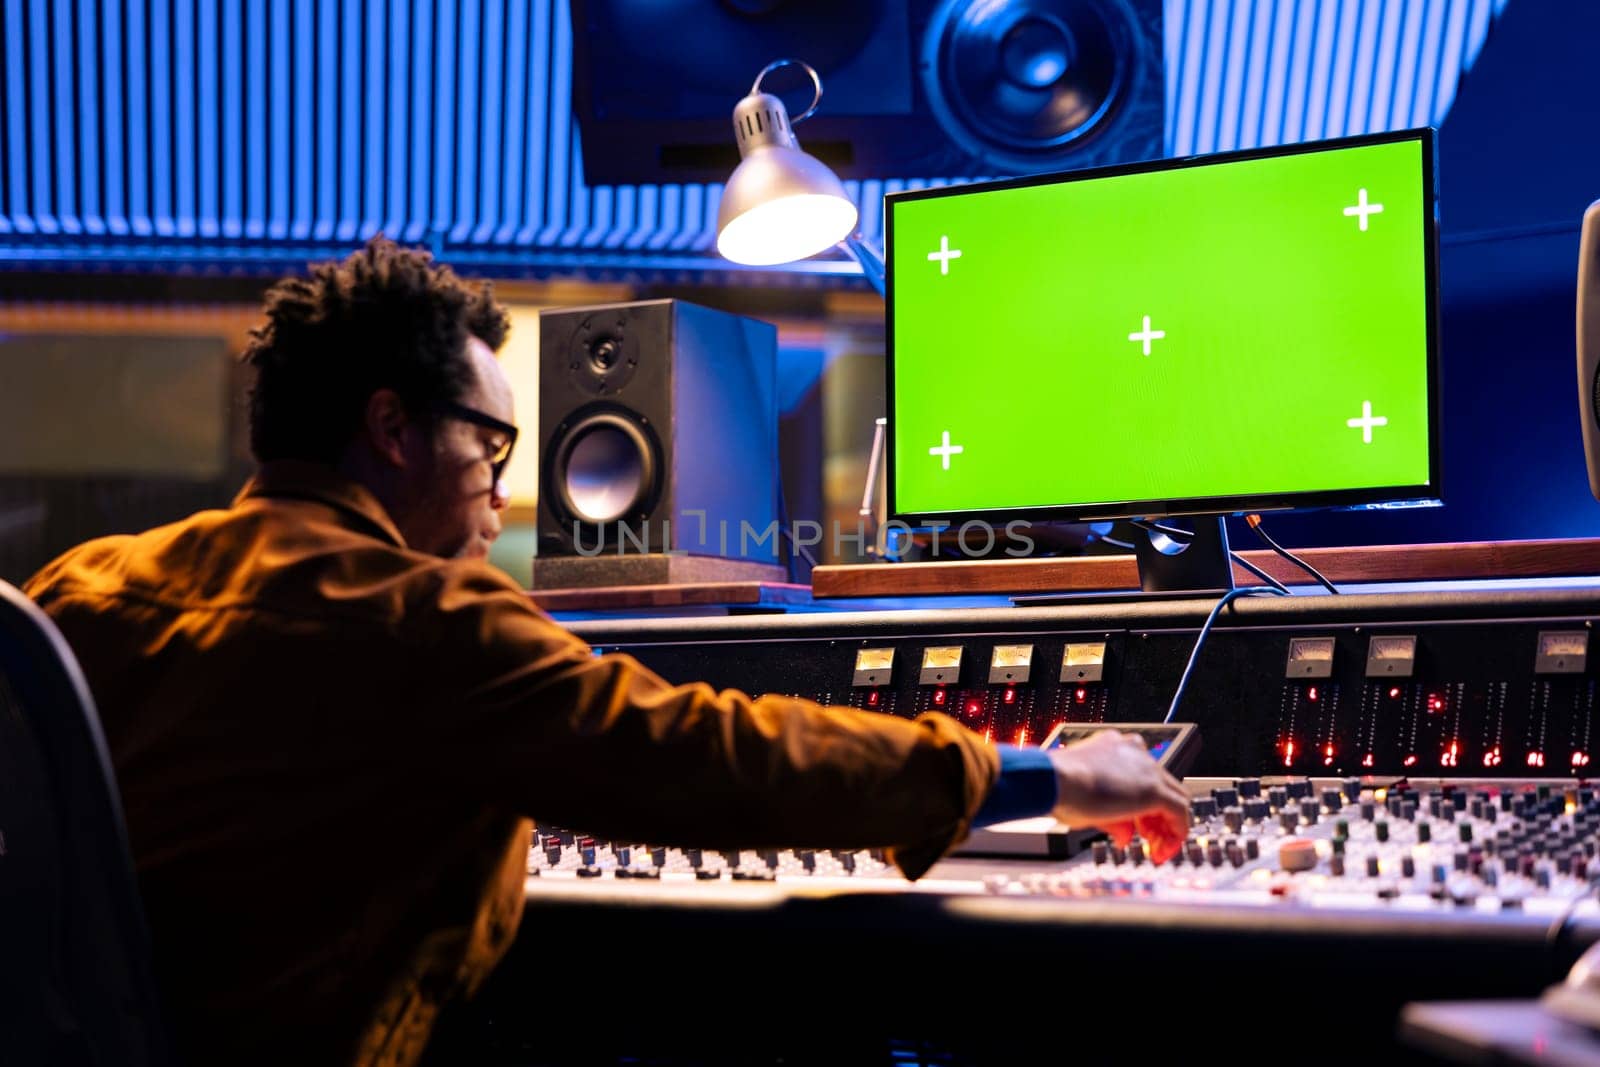 African american producer editing music on console with isolated display pc, mixing and mastering sounds on control desk board. Young audio engineer operates on sliders and buttons.